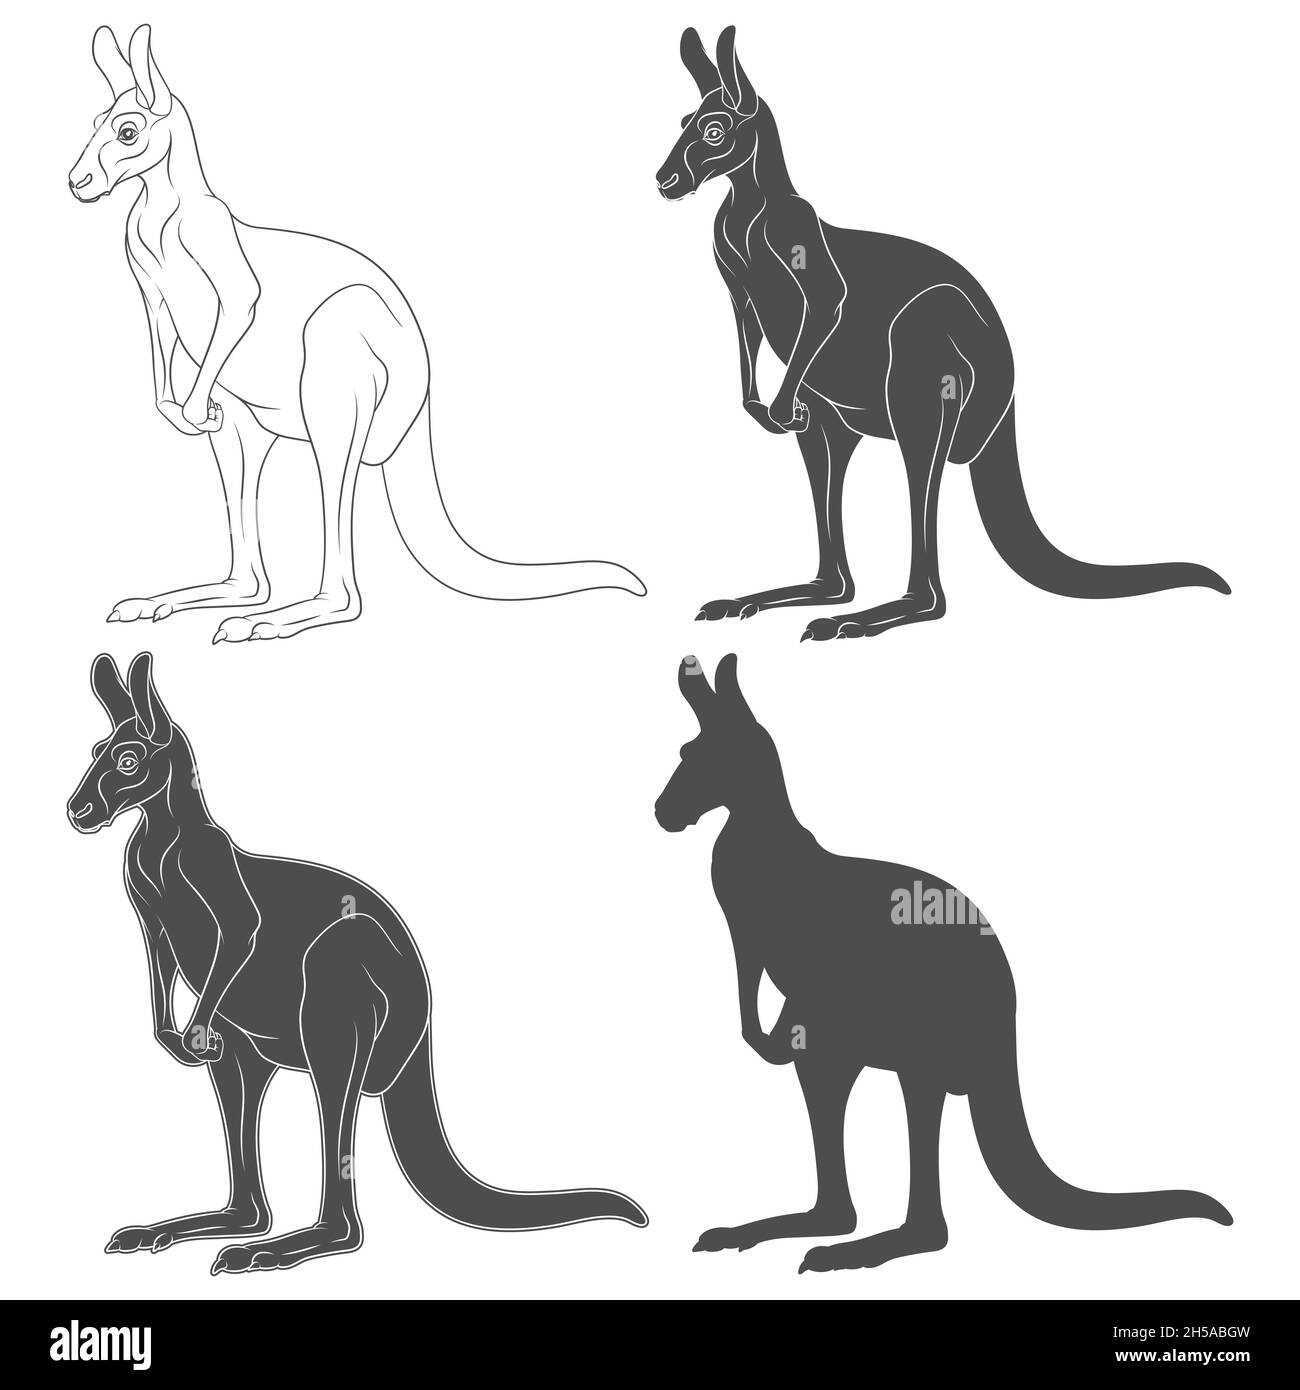 Set of black and white illustrations of kangaroo. Isolated vector objects on white background. Stock Vector